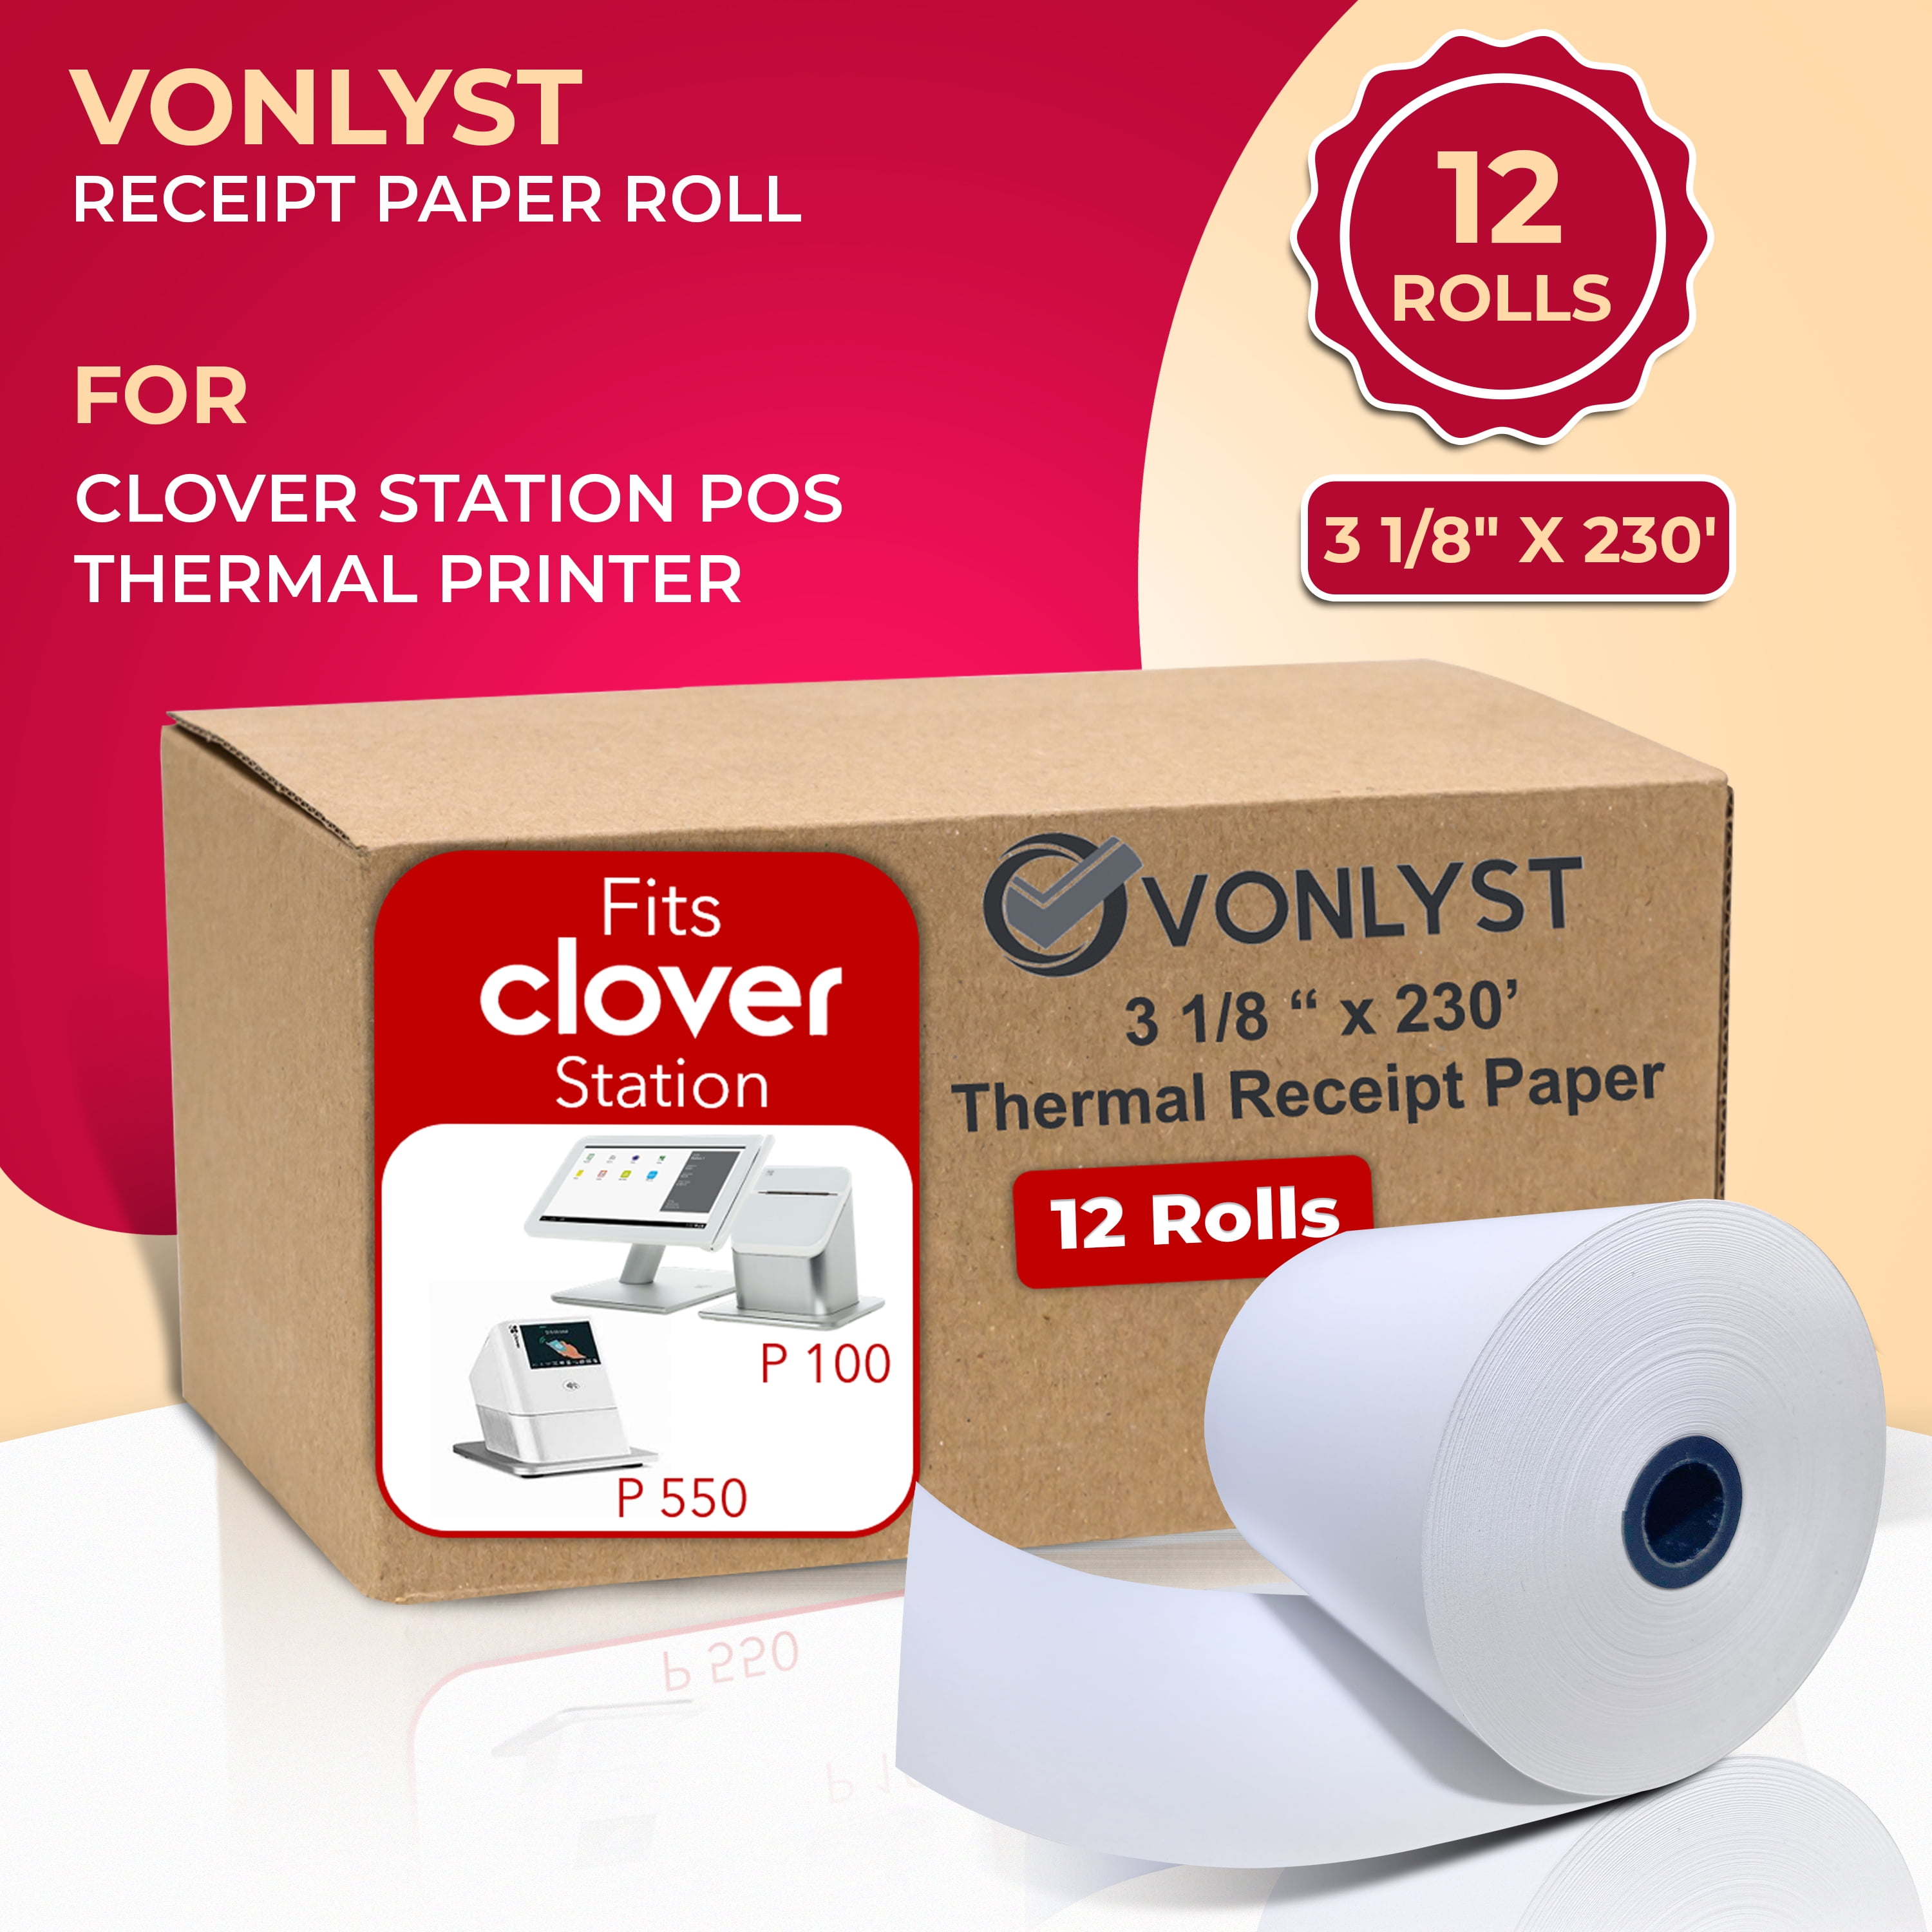 50 Rolls 57x38 mm Thermal Rolls Exclusive Offer Credit Card Receipt Paper Rolls 